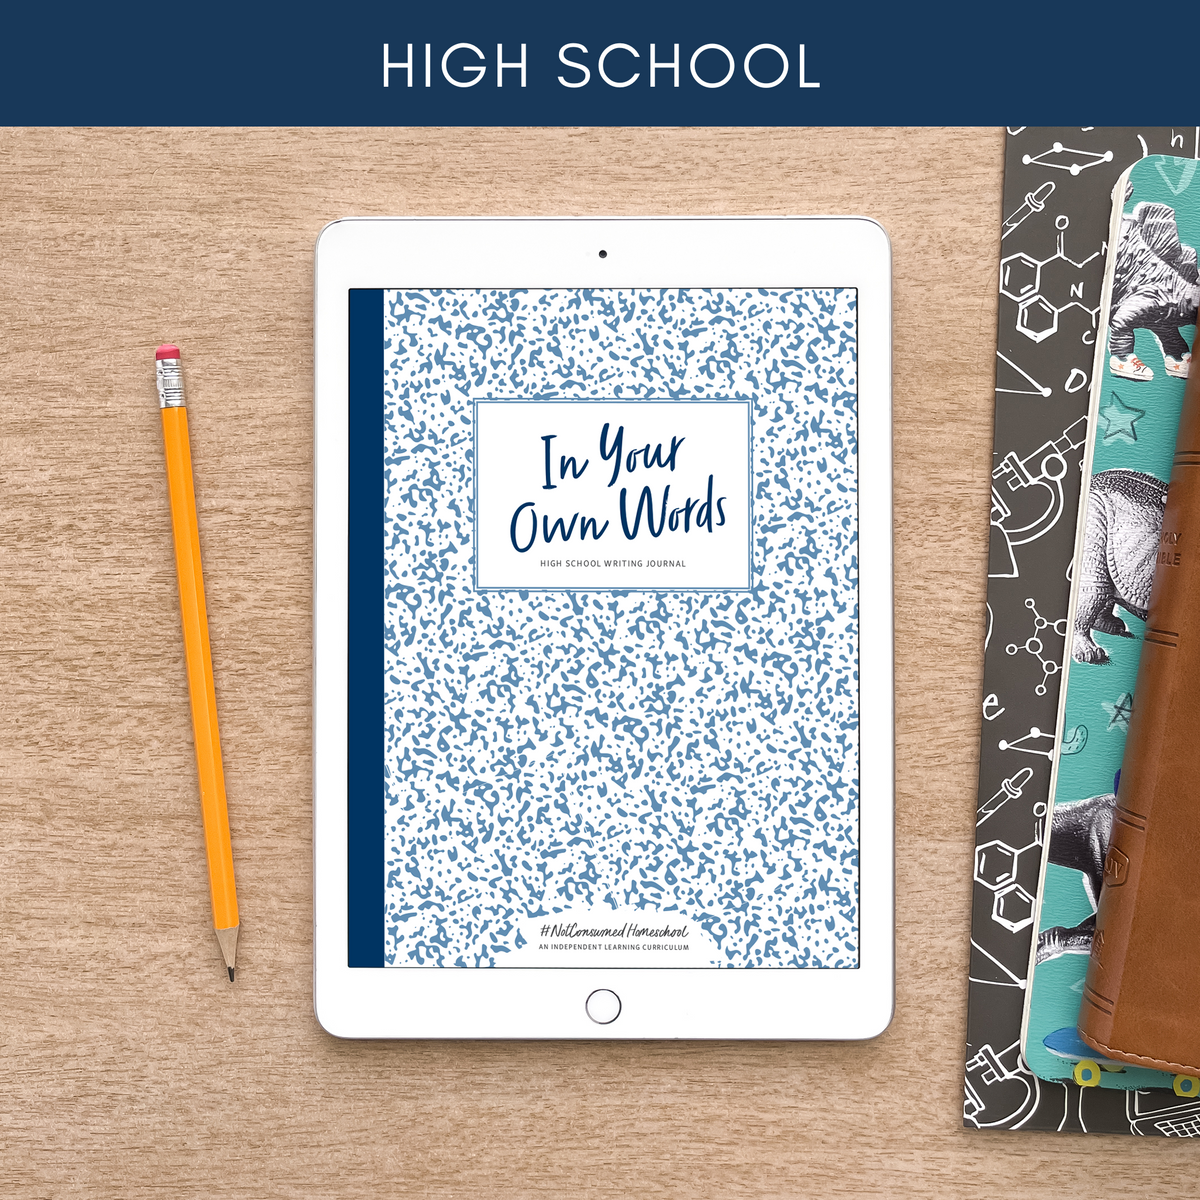 In Your Own Words Creative Writing Journal for High School (Digital)